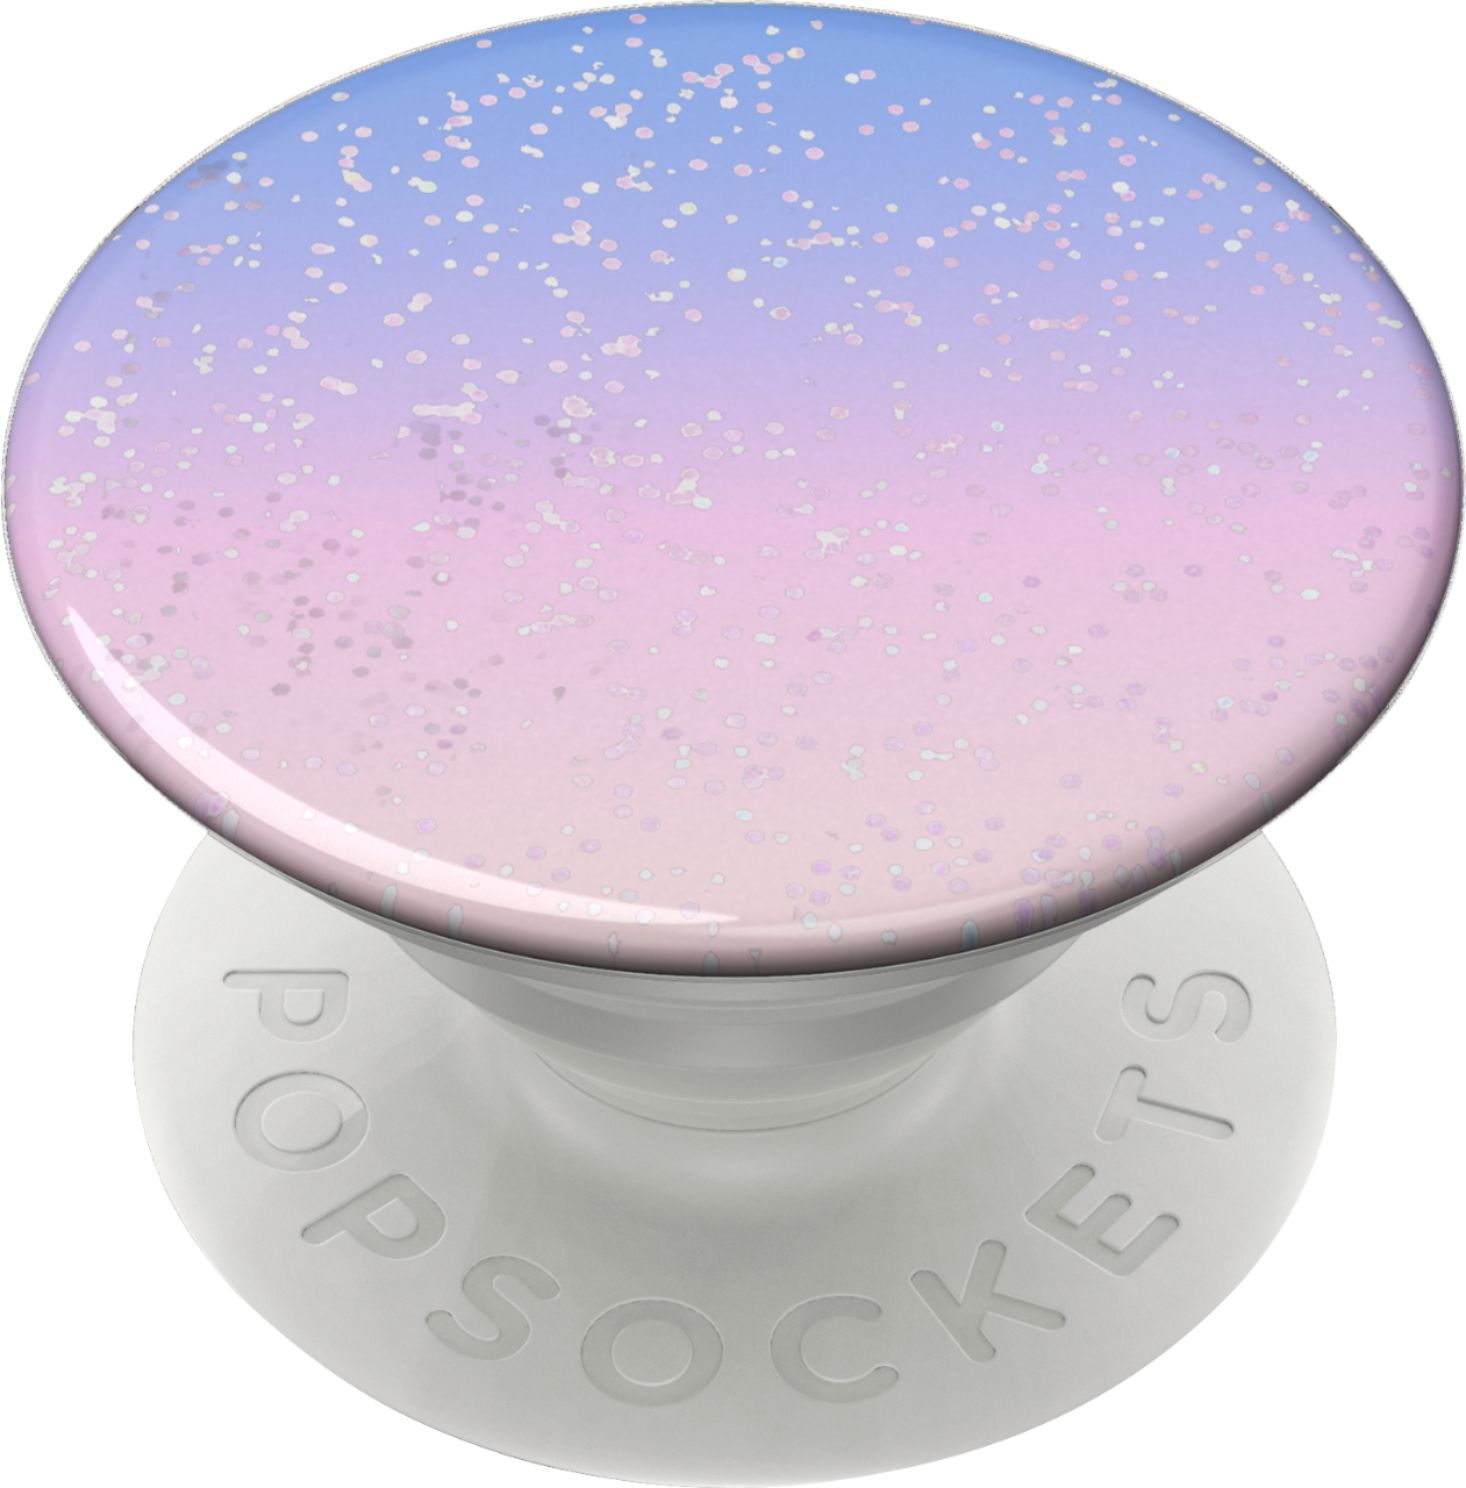 Angle View: PopSockets - PopGrip Premium Cell Phone Grip & Stand - Acetate Pearl White